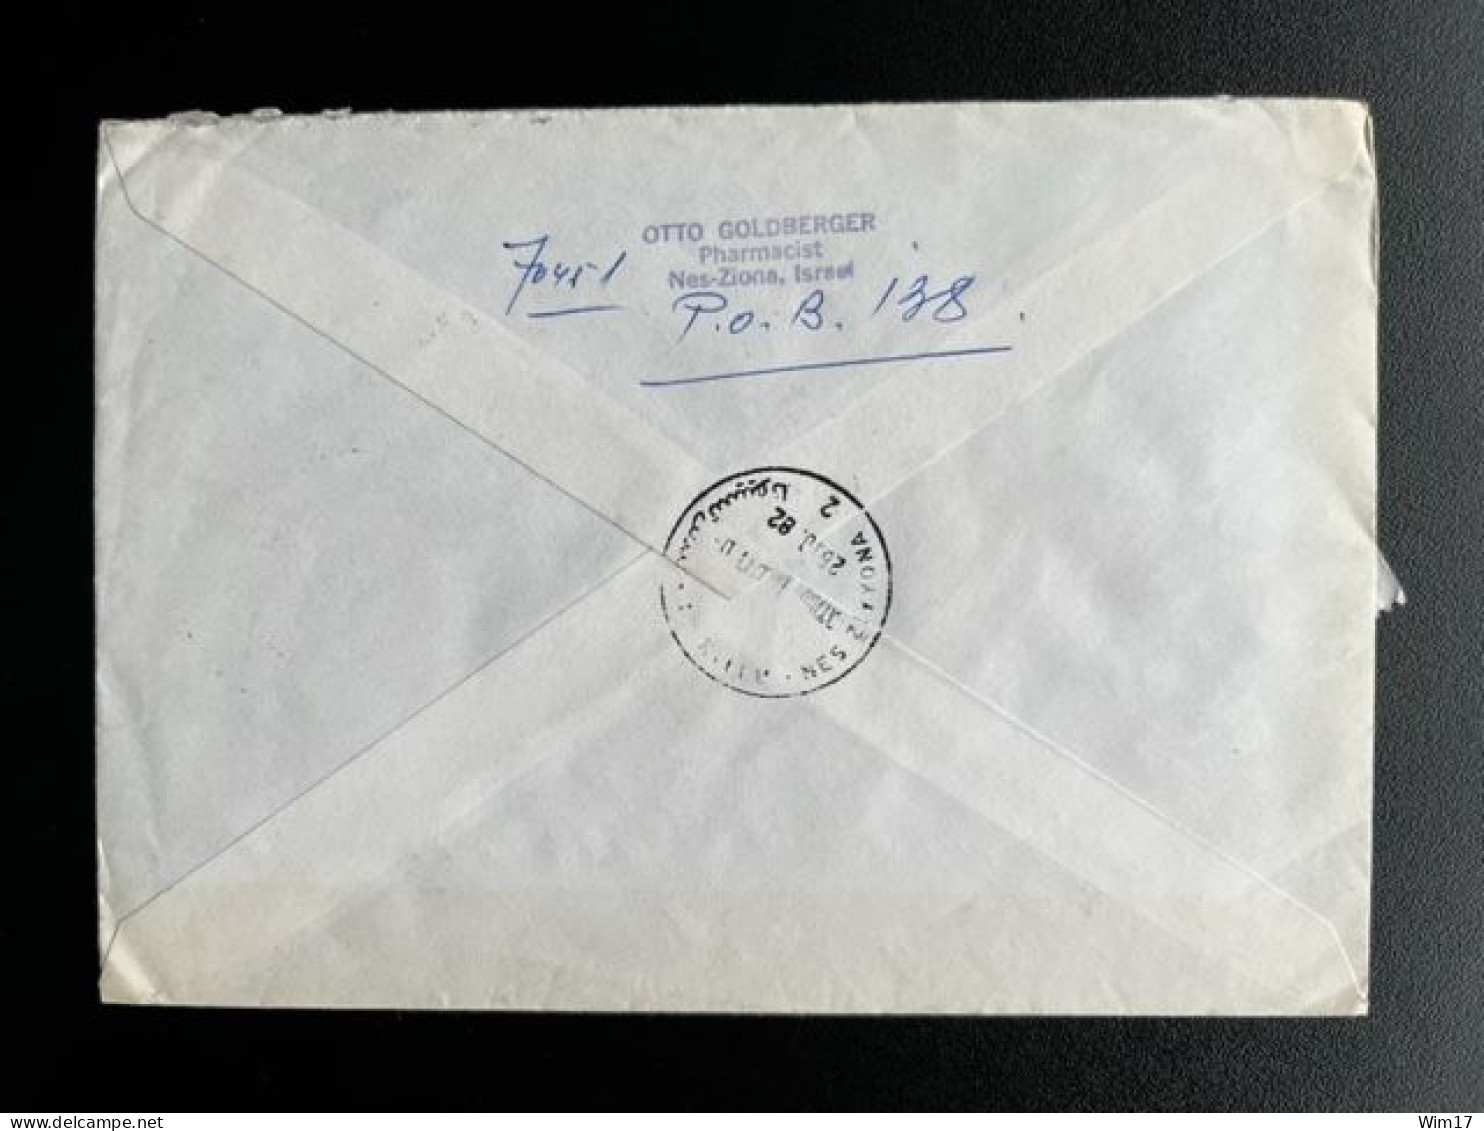 ISRAEL 1982 REGISTERED LETTER NES ZIYYONA TO DORTMUND 26-10-1982 - Covers & Documents